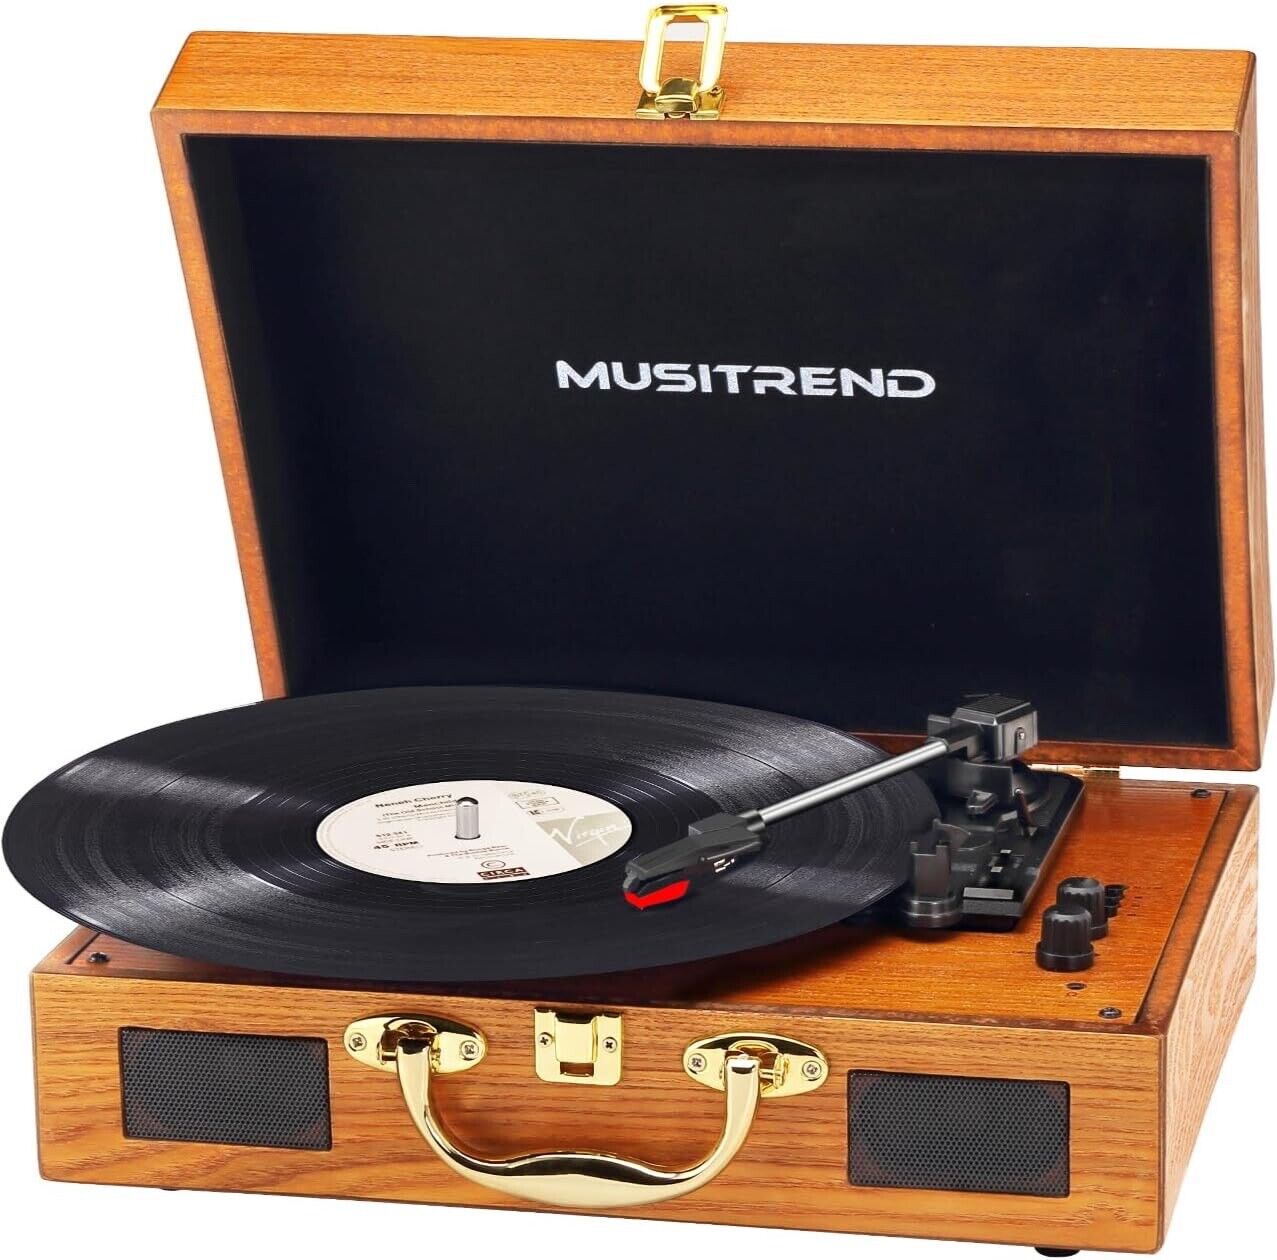 Musitrend NostalgicVinyl Record Player with Bluetooth 3 Speed Turntable Belt